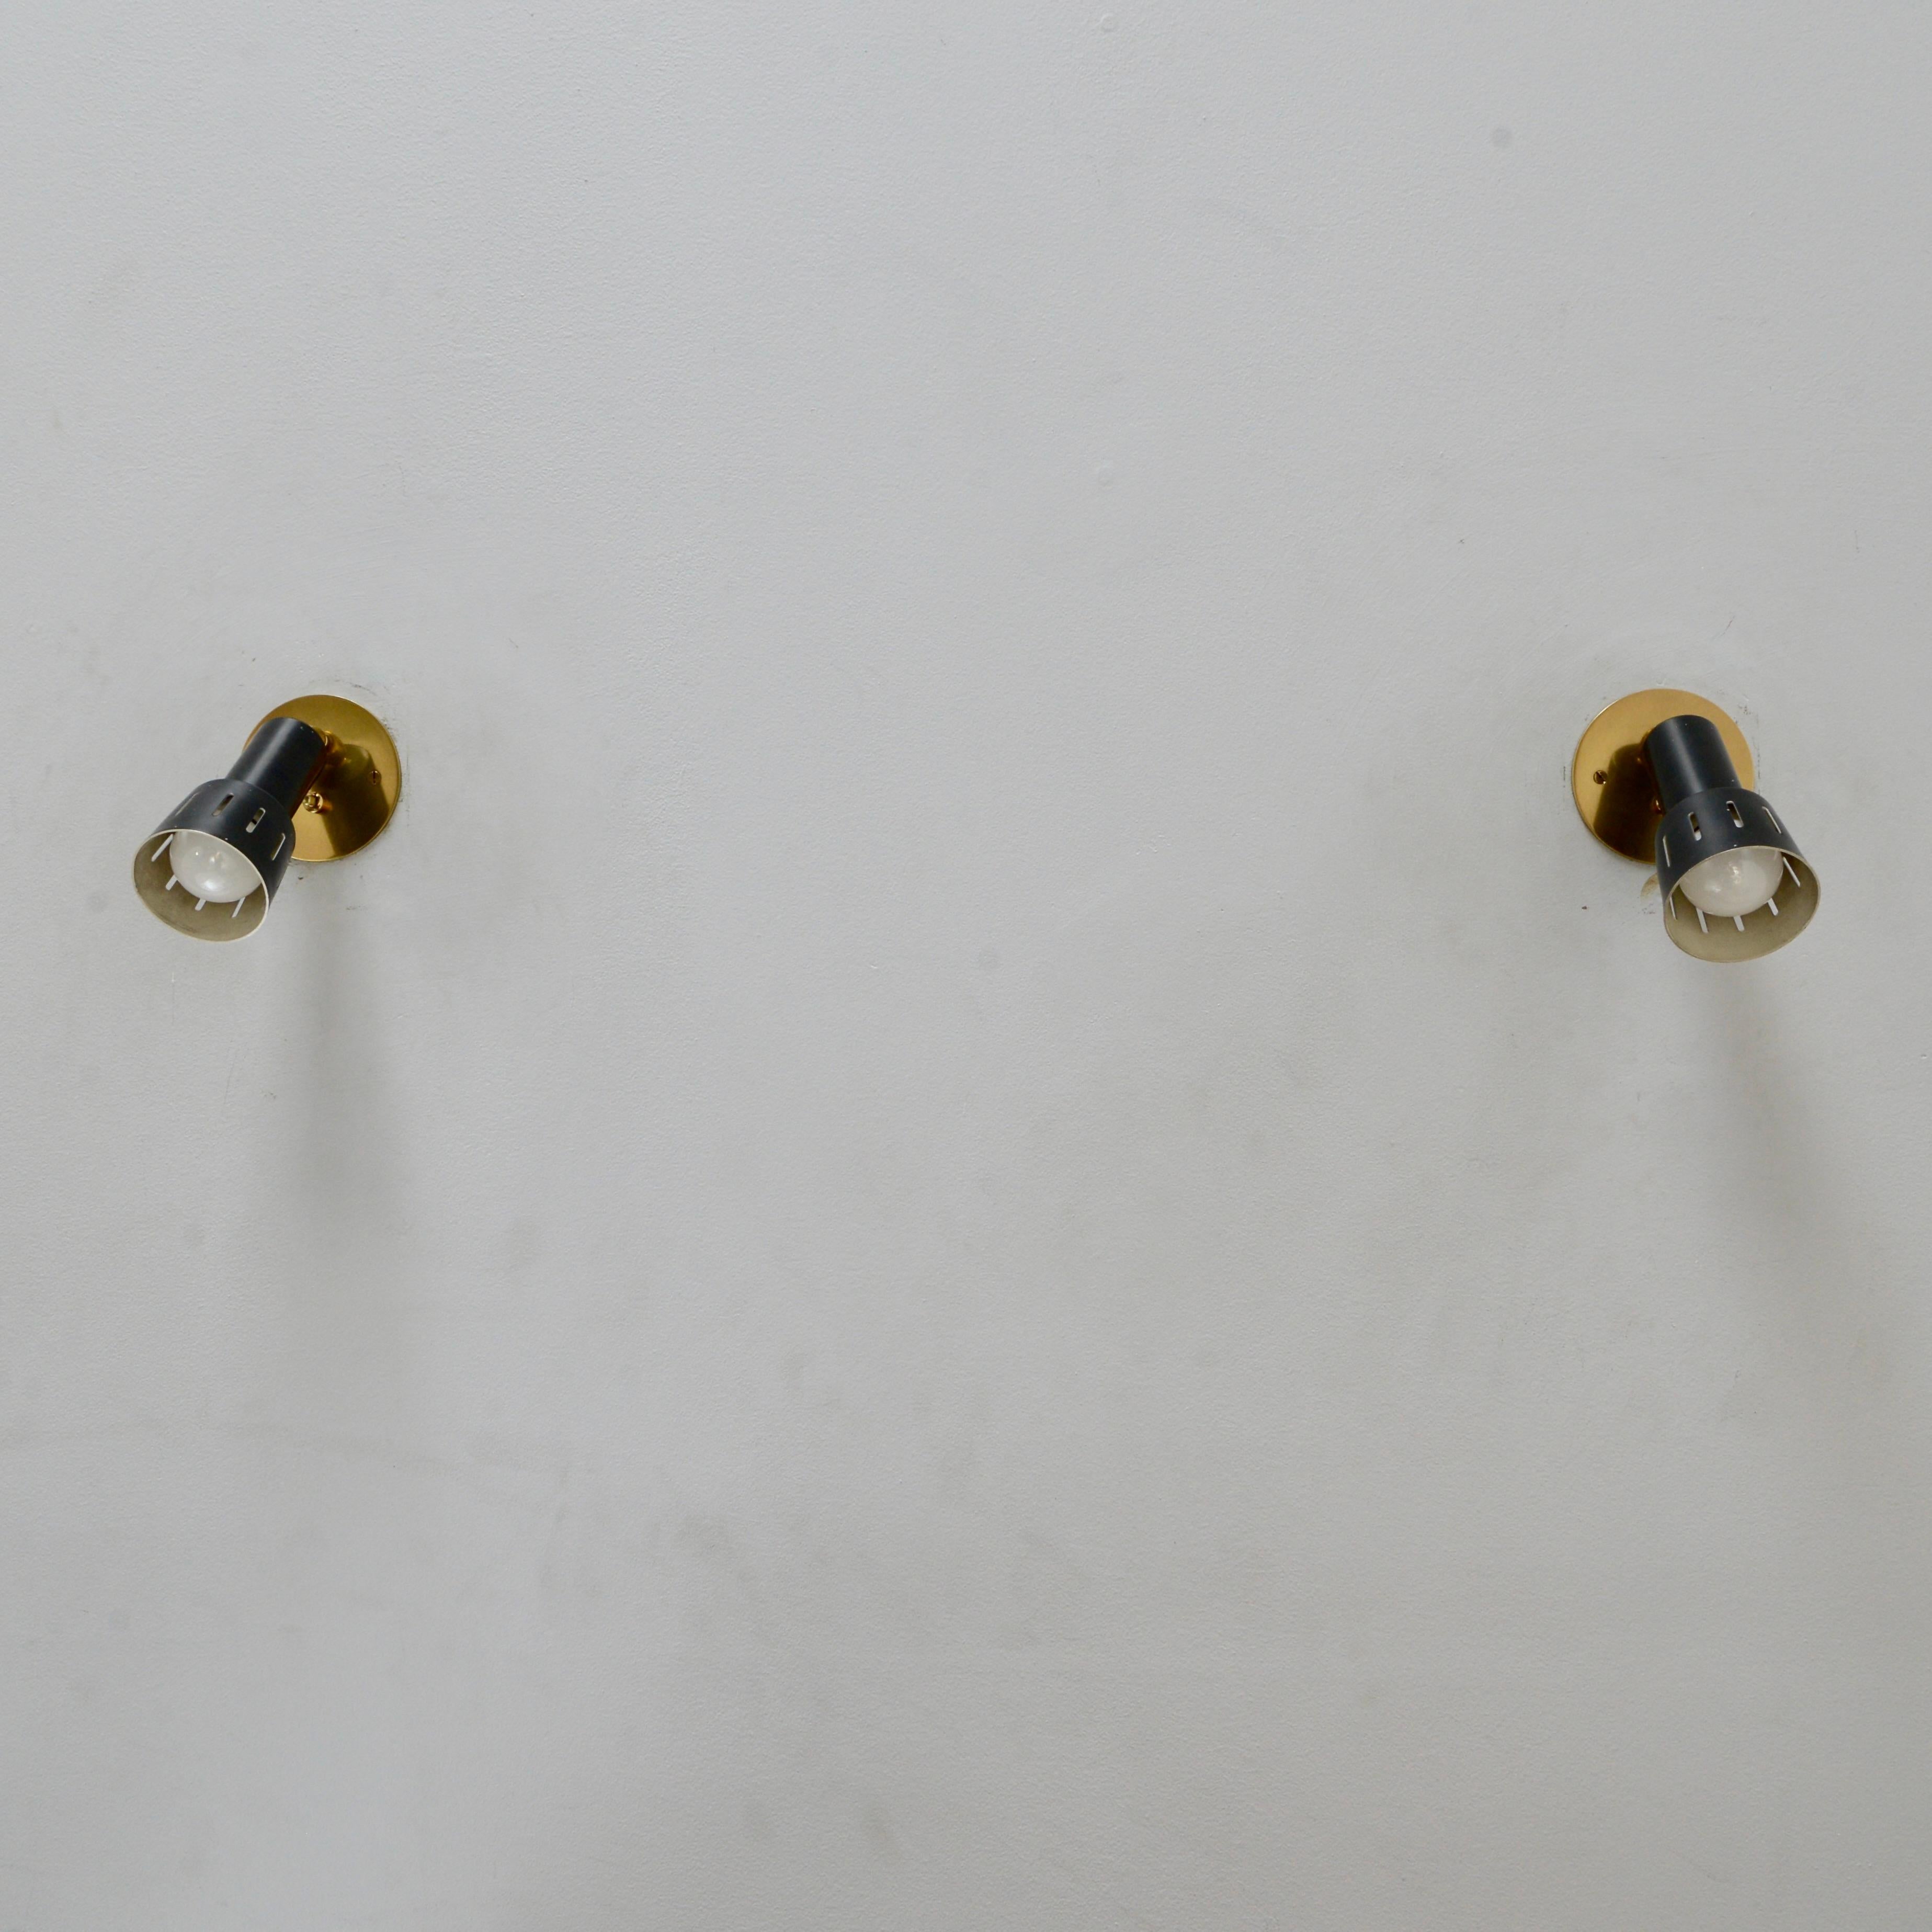 50s Directional Spot Sconces In Good Condition For Sale In Los Angeles, CA